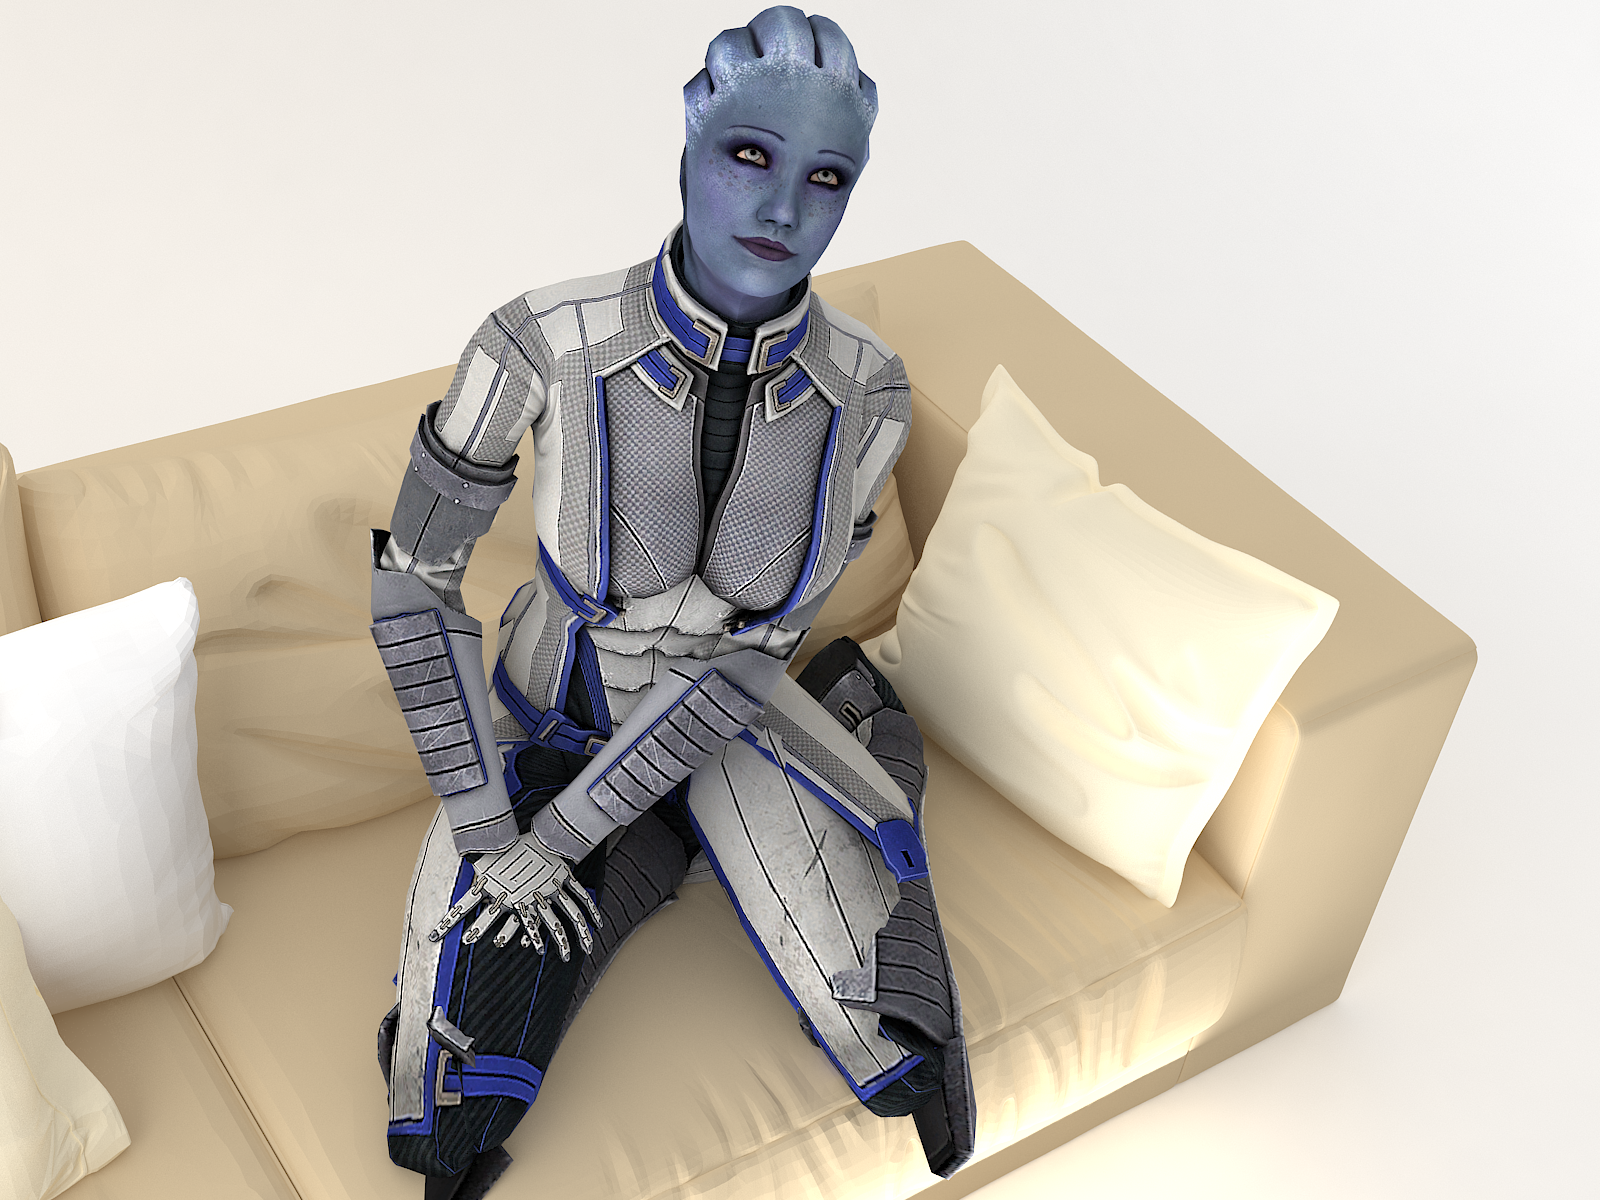 liara_s_waiting_by_artmancarver-d7mstrn.png